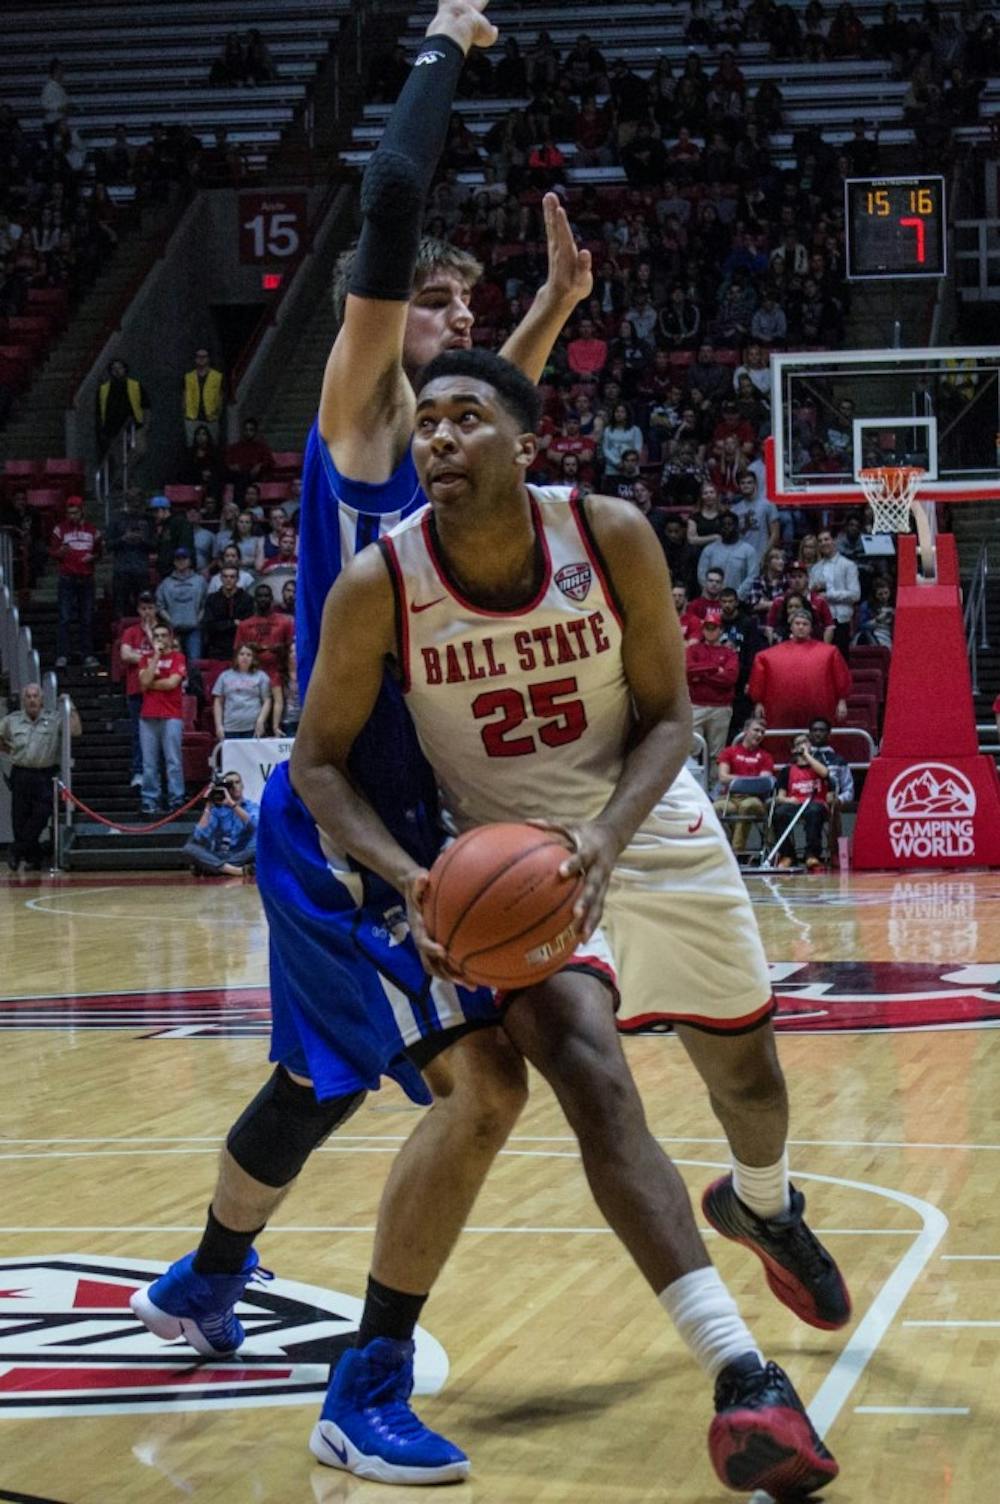 Offense shines in Ball State's exhibition win over Saint Francis